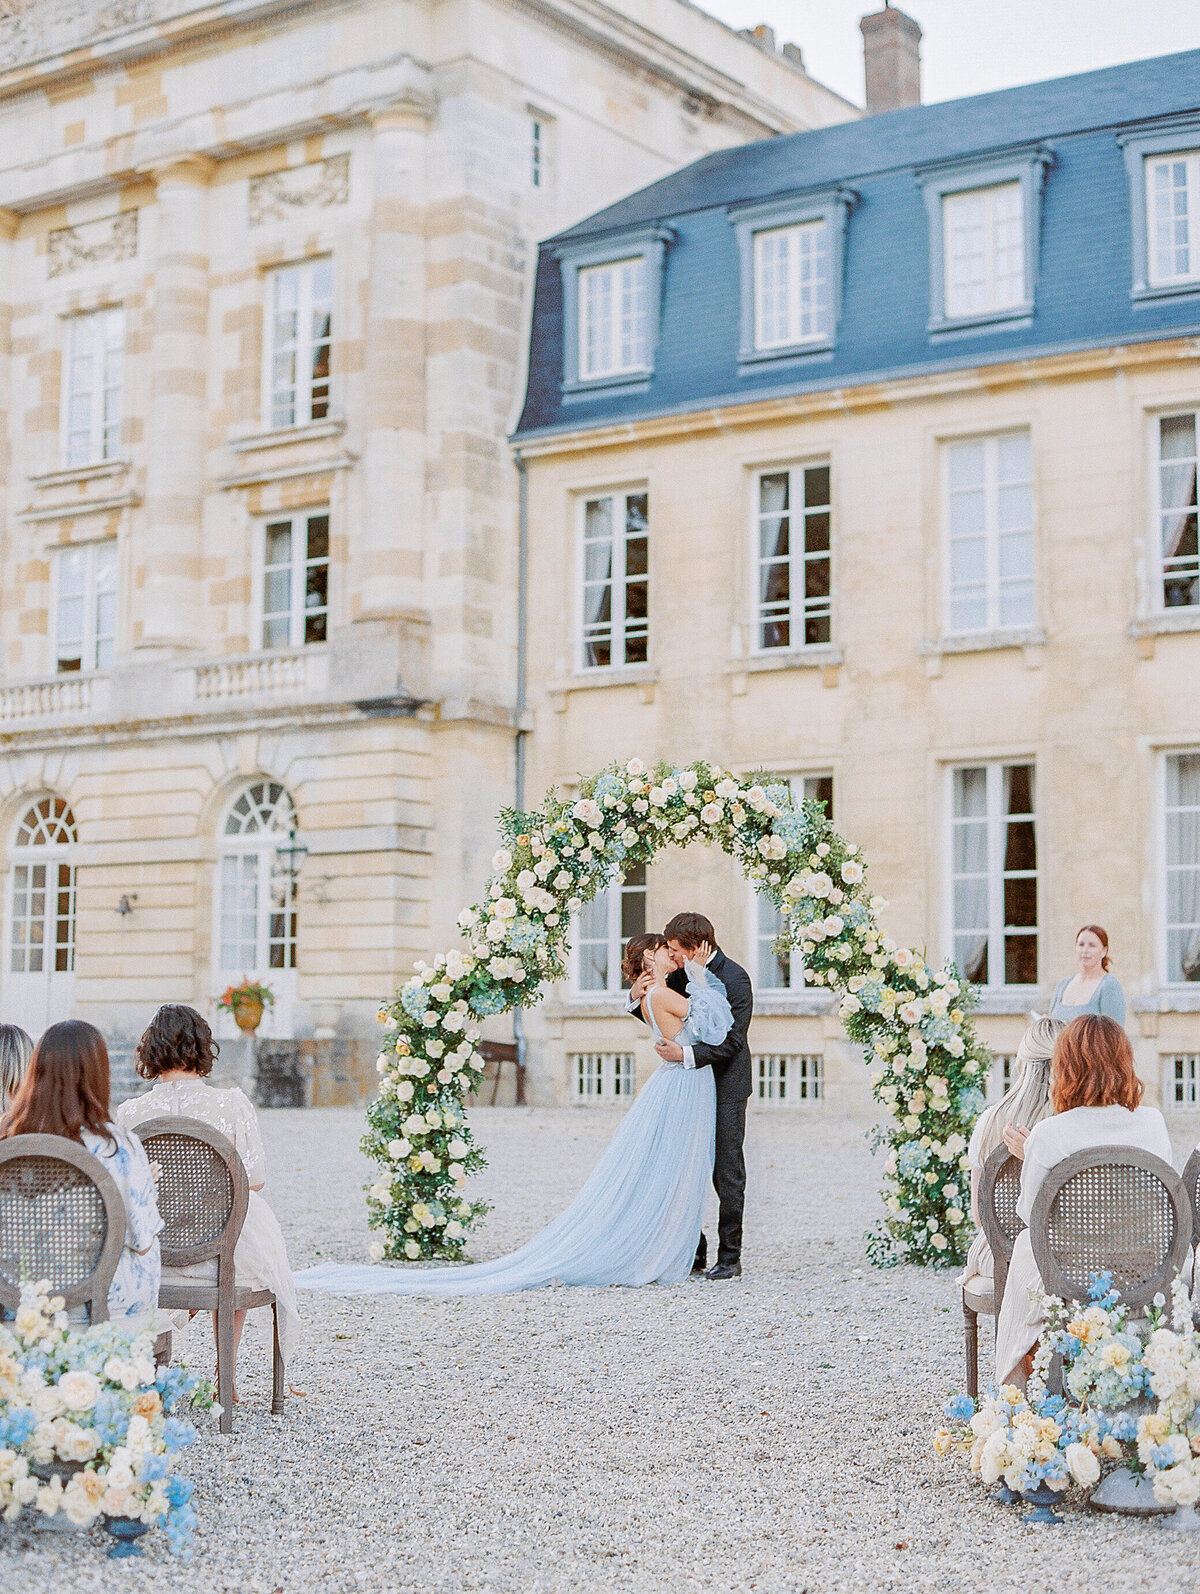 Bride and Groom Embrace at Chateau de Courtomer Wedding